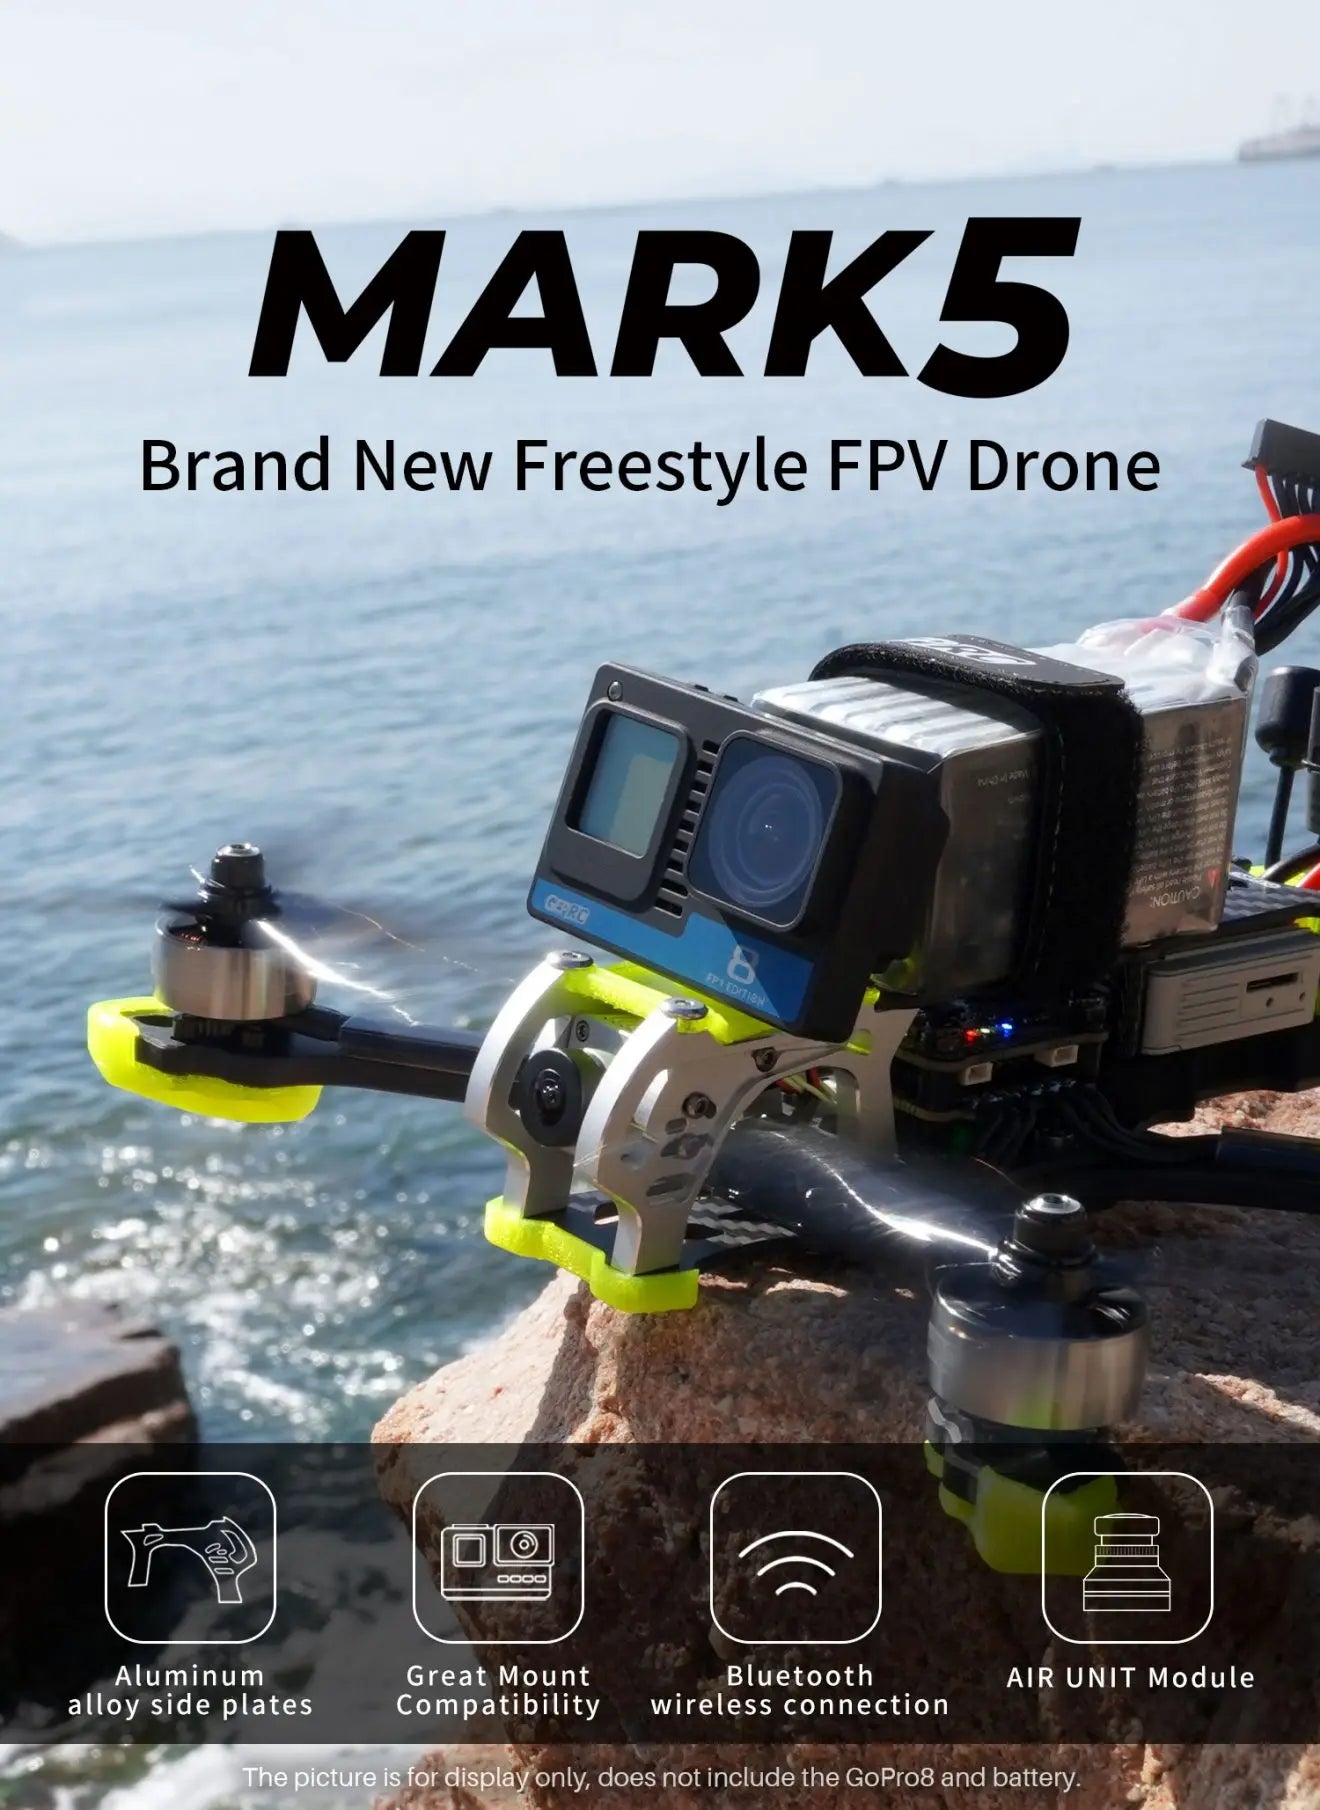 MARK5 HD AVATAR Freestyle FPV Drone, MARKS Brand New Freestyle FPV Drone 7 DooO Aluminum Great Mount